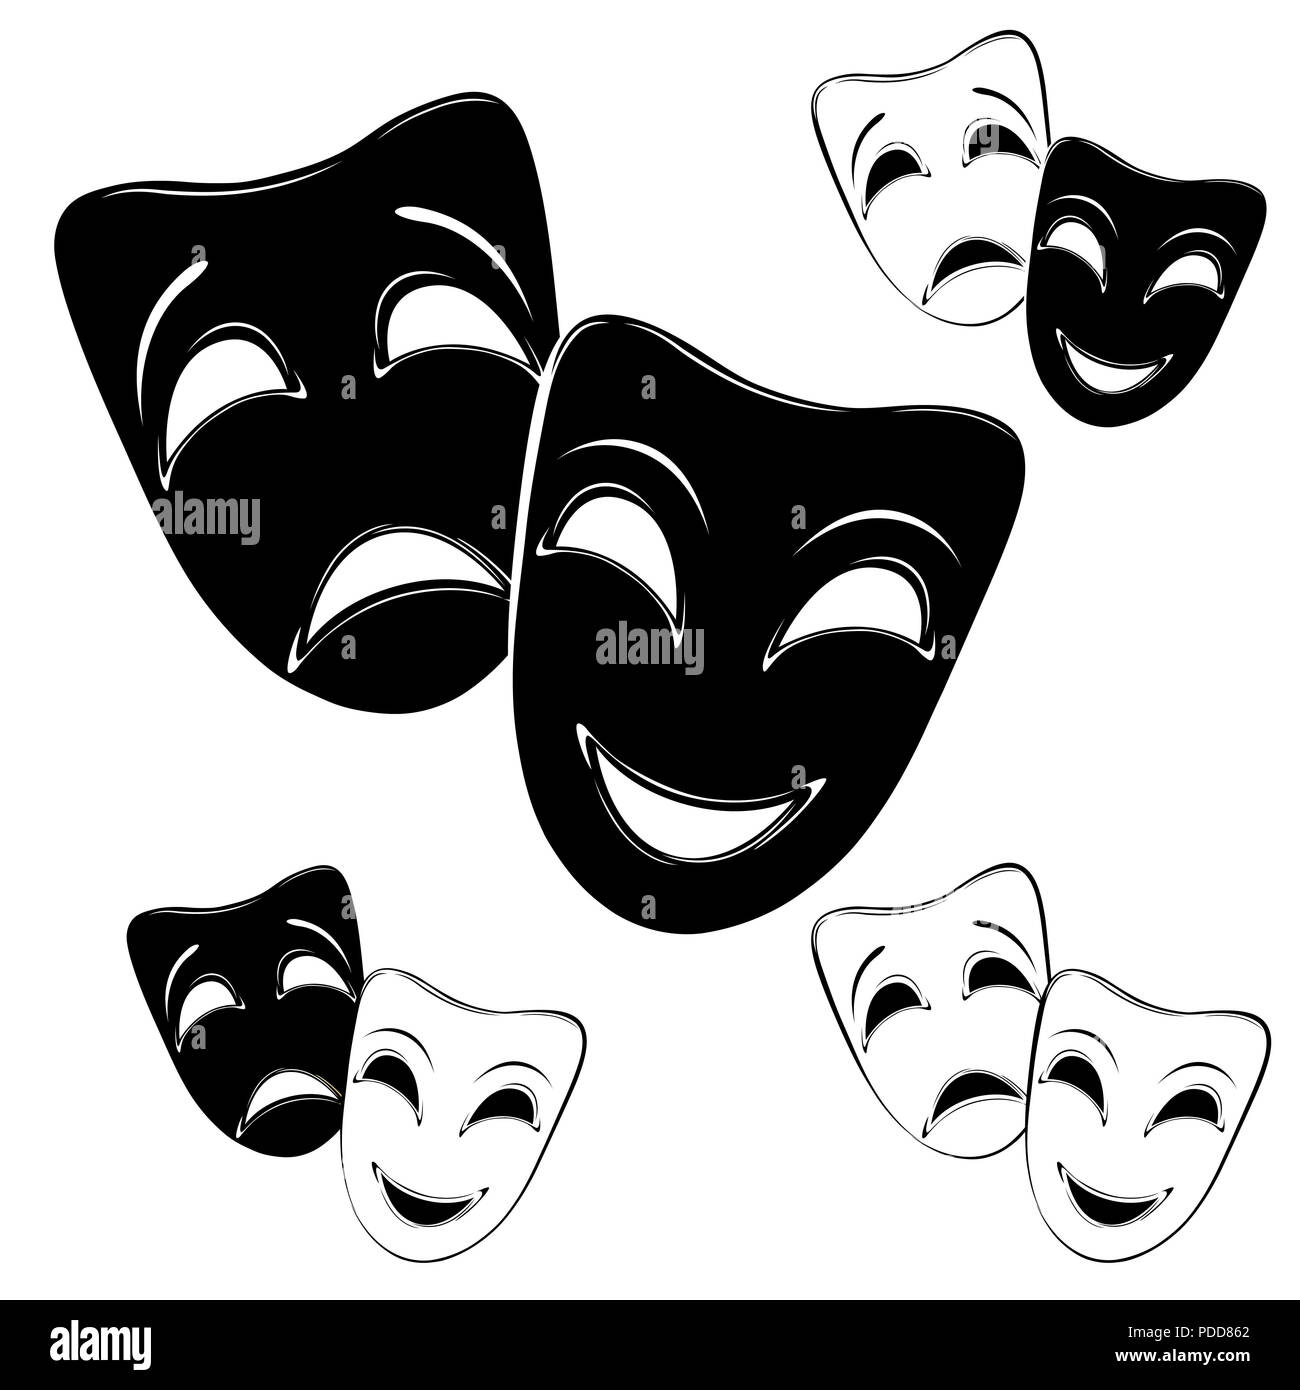 Collection of theater masks on a white background. Stock Photo